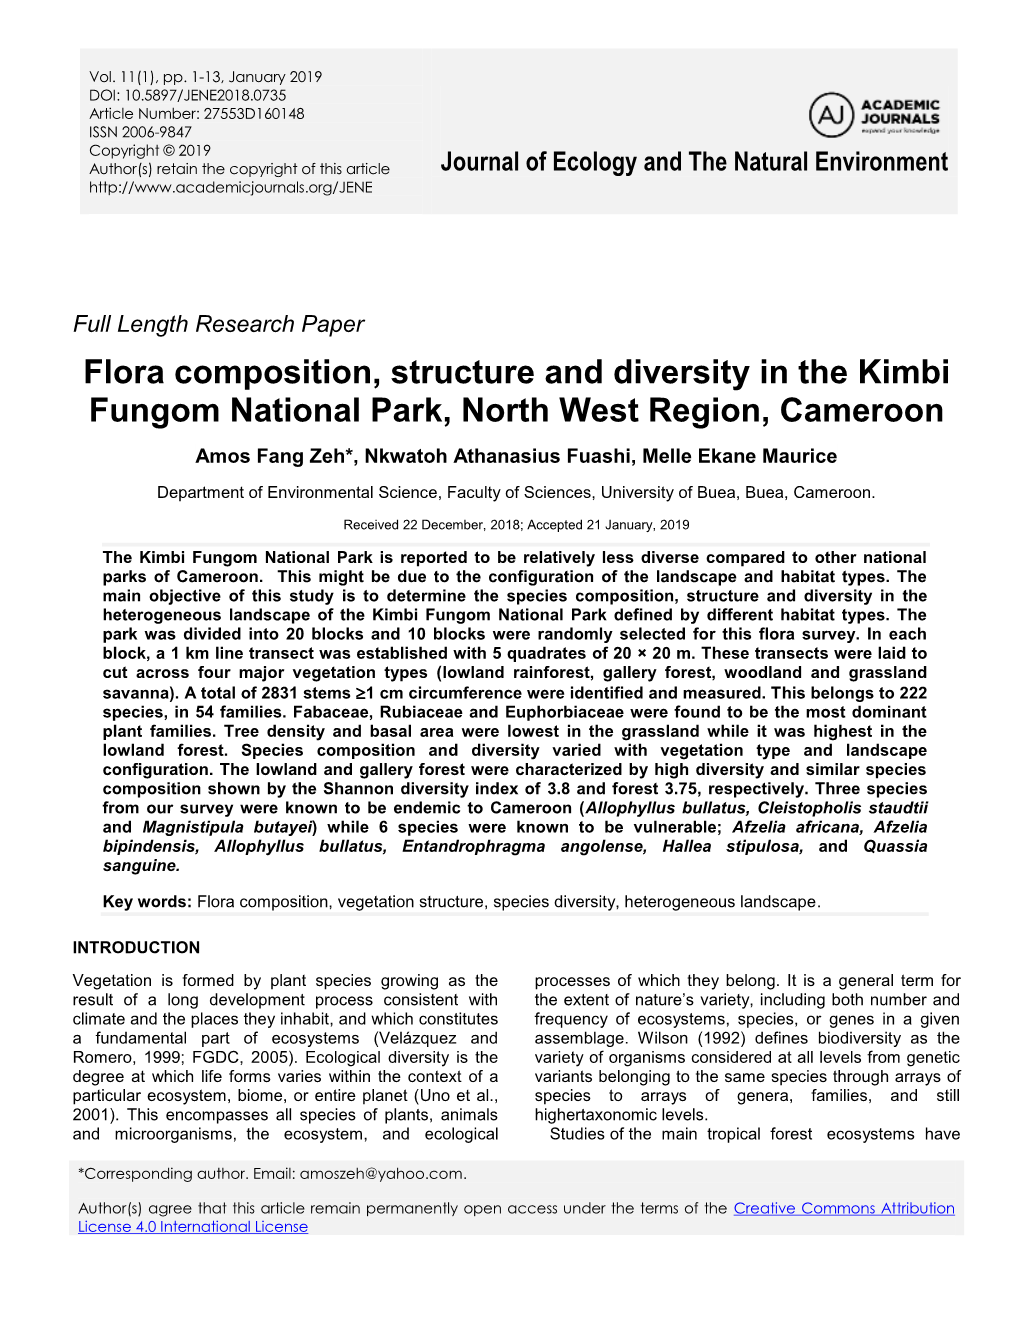 Flora Composition, Structure and Diversity in the Kimbi Fungom National Park, North West Region, Cameroon